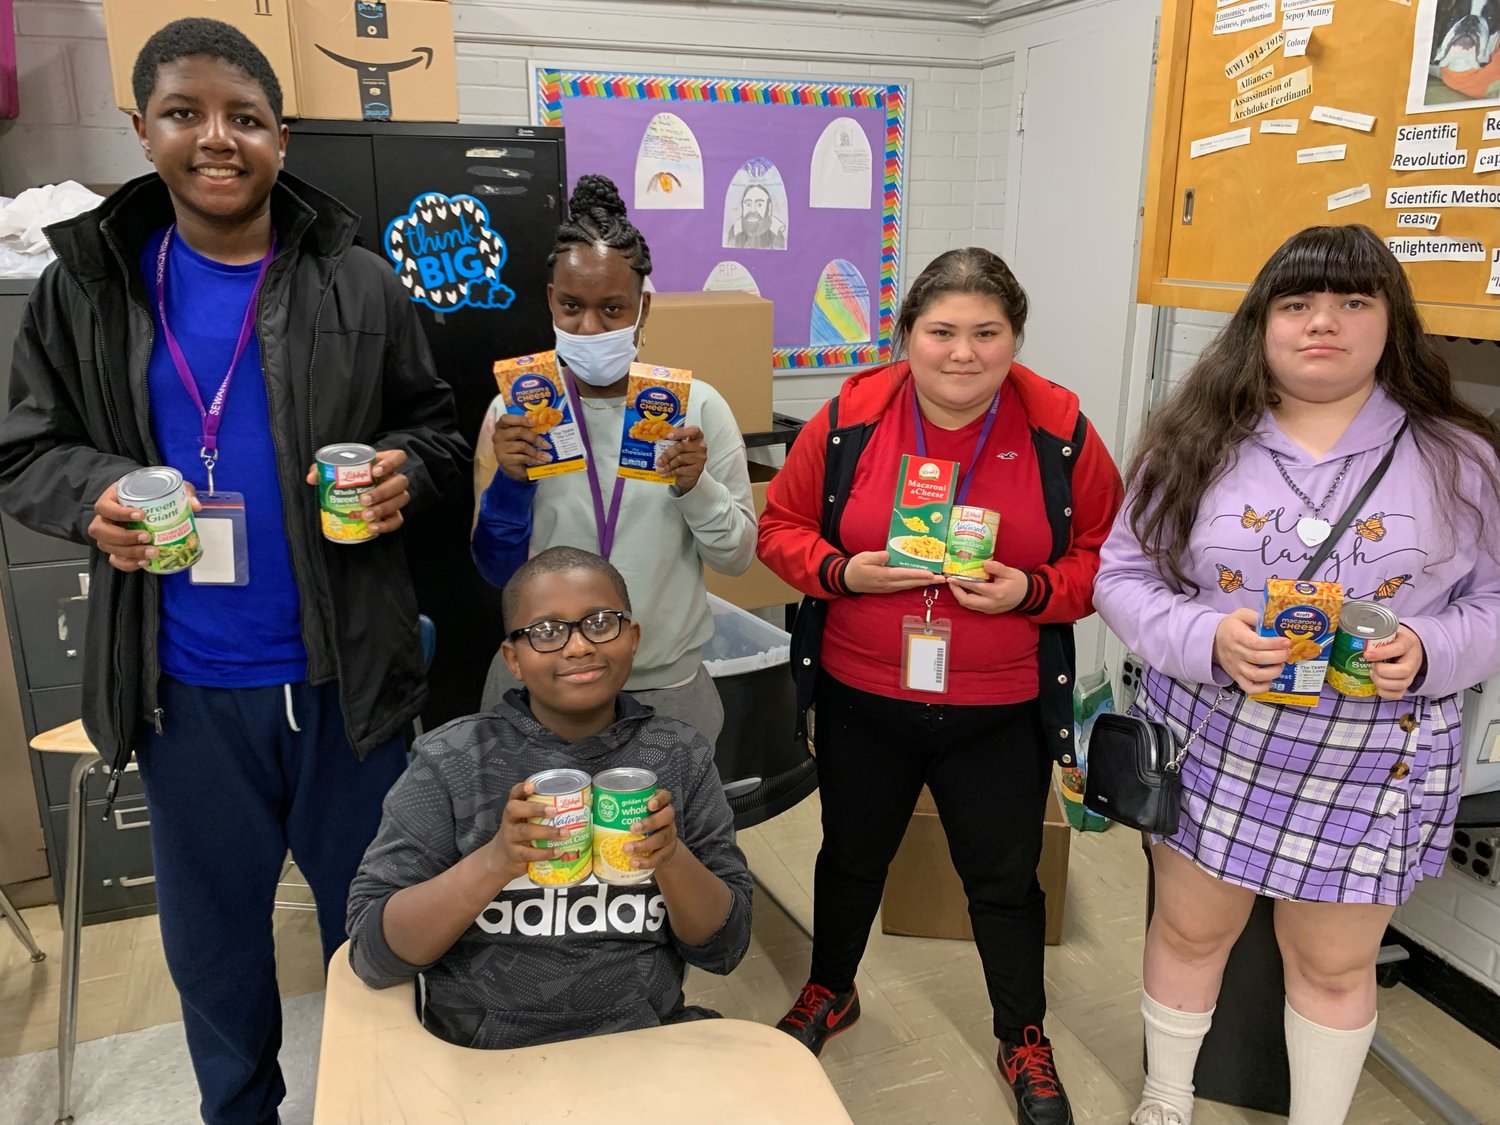 Sewanhaka High School students Andrew Baptiste, left, Grace Toussaint, Sebastian Ulysses Jocelyn Galdamez and Kathleen Galdamez with items collected for the Thanksgiving food drive.